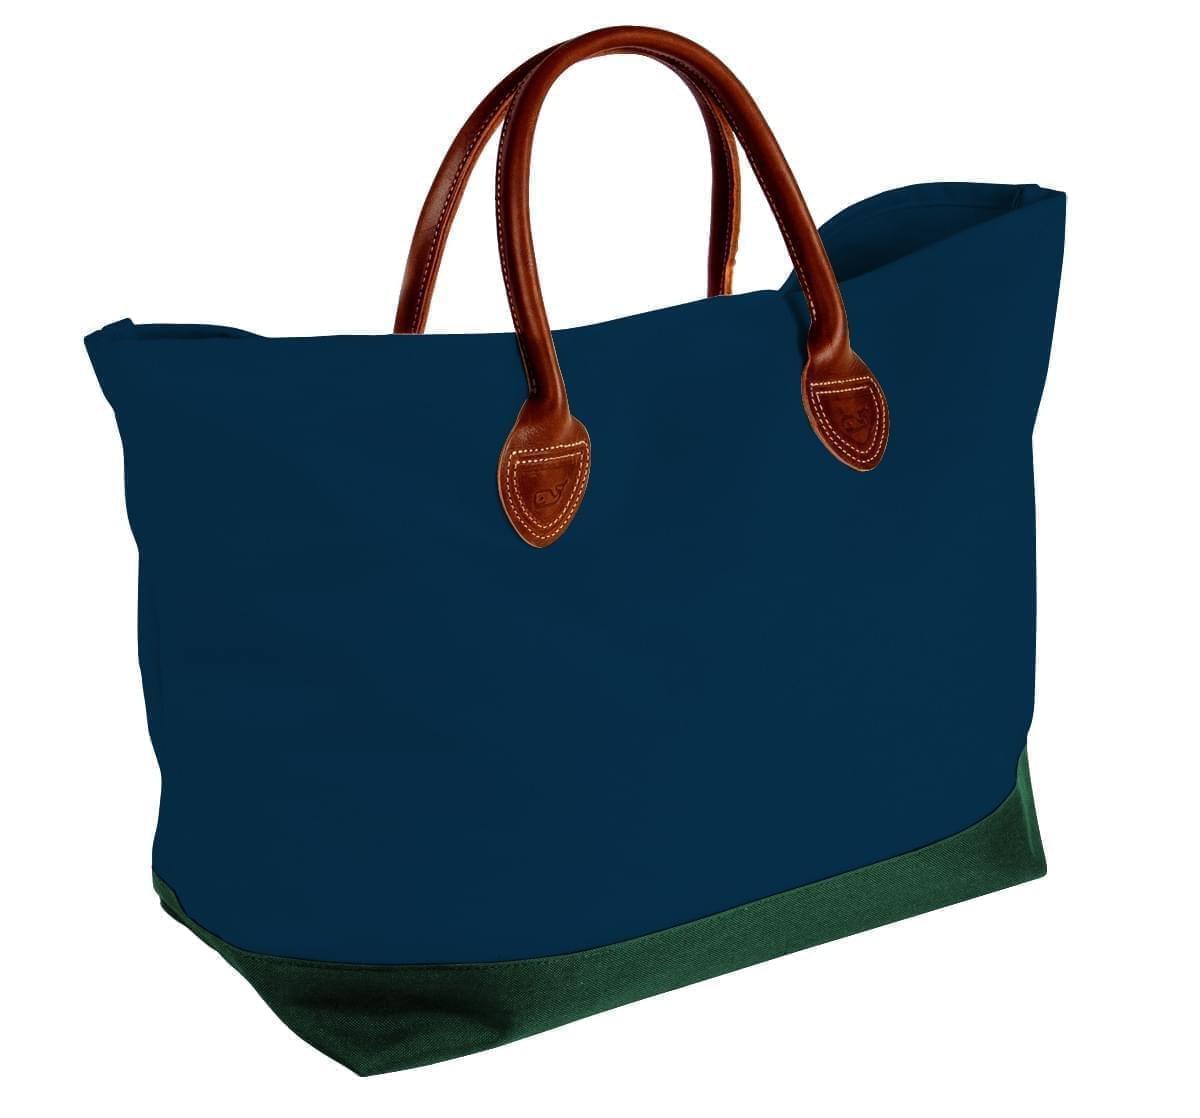 USA Made Canvas Leather Handle Totes, Navy-Hunter Green, 10899-VC9